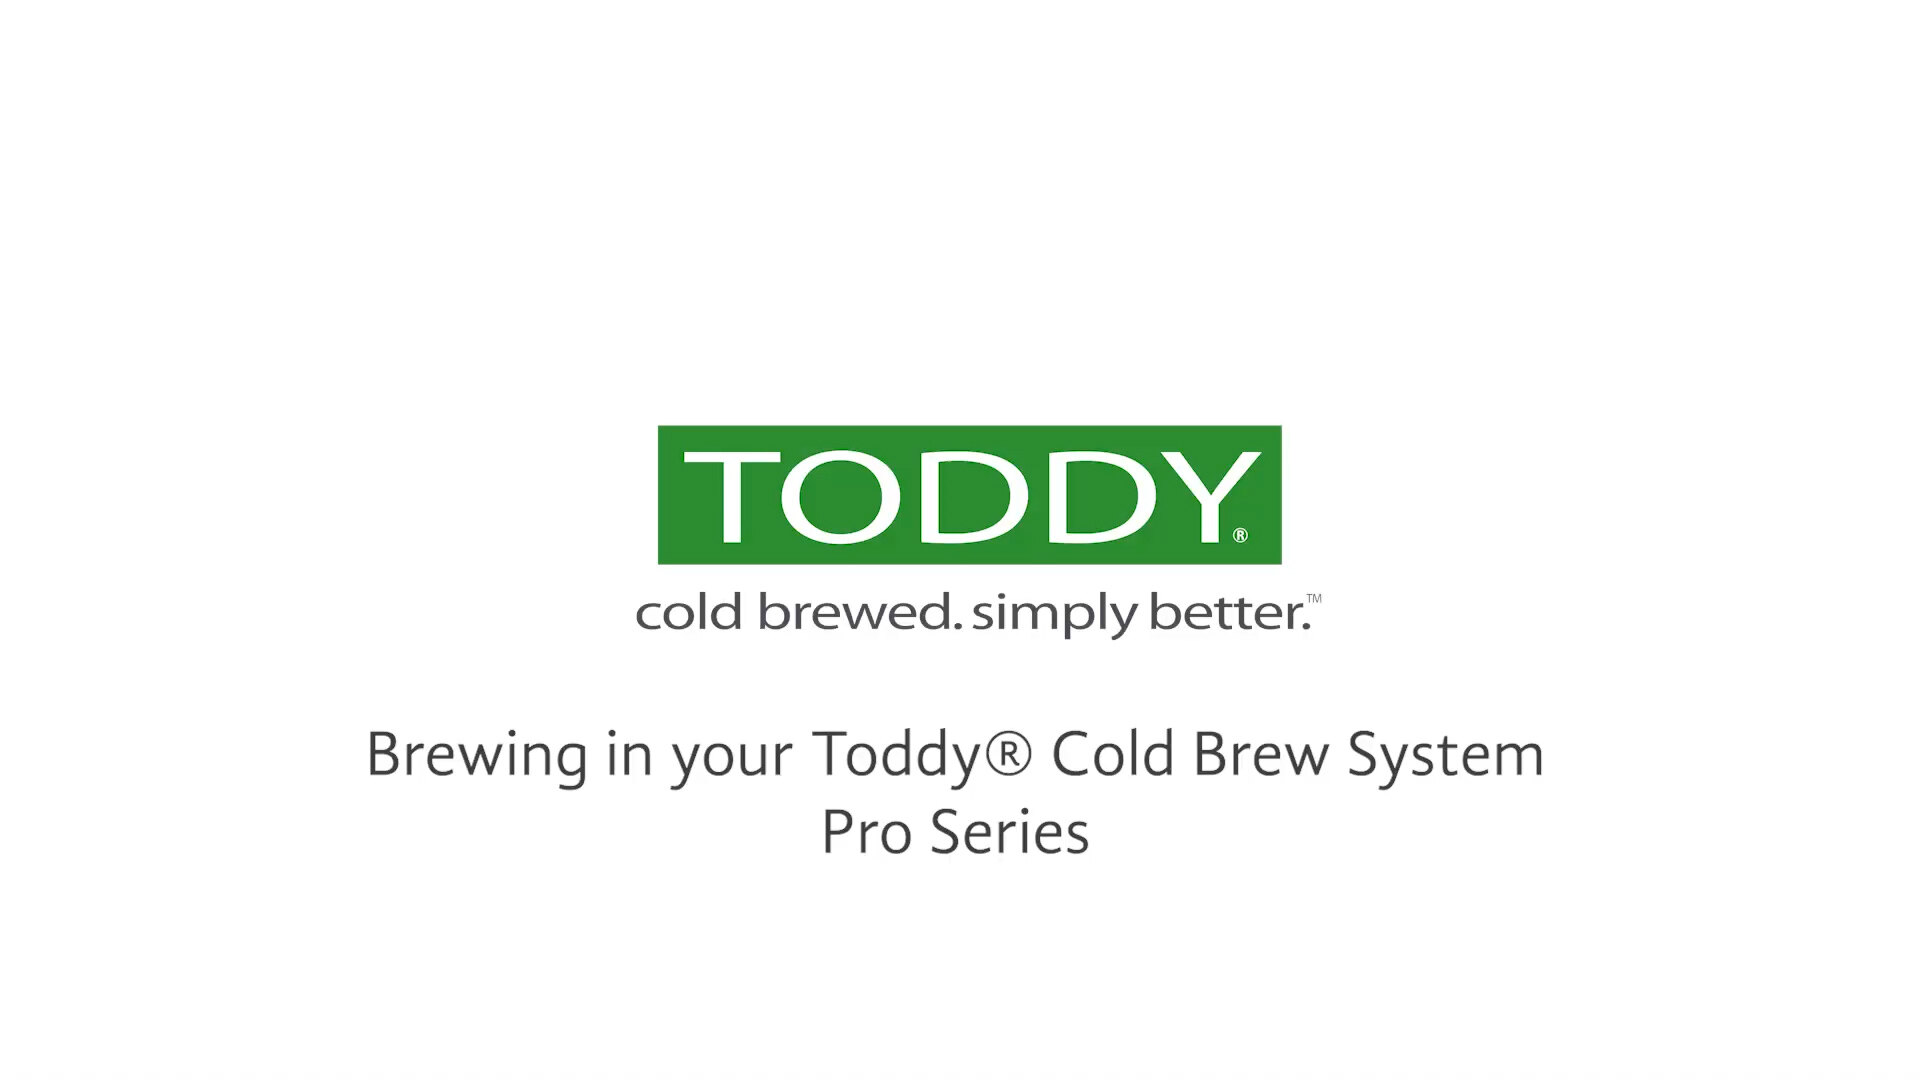 https://cdn.webstaurantstore.com/images/videos/extra_large/brewing_in_your_toddy_cold_brew_system_pro_series.00_00_01_29.still001.jpg